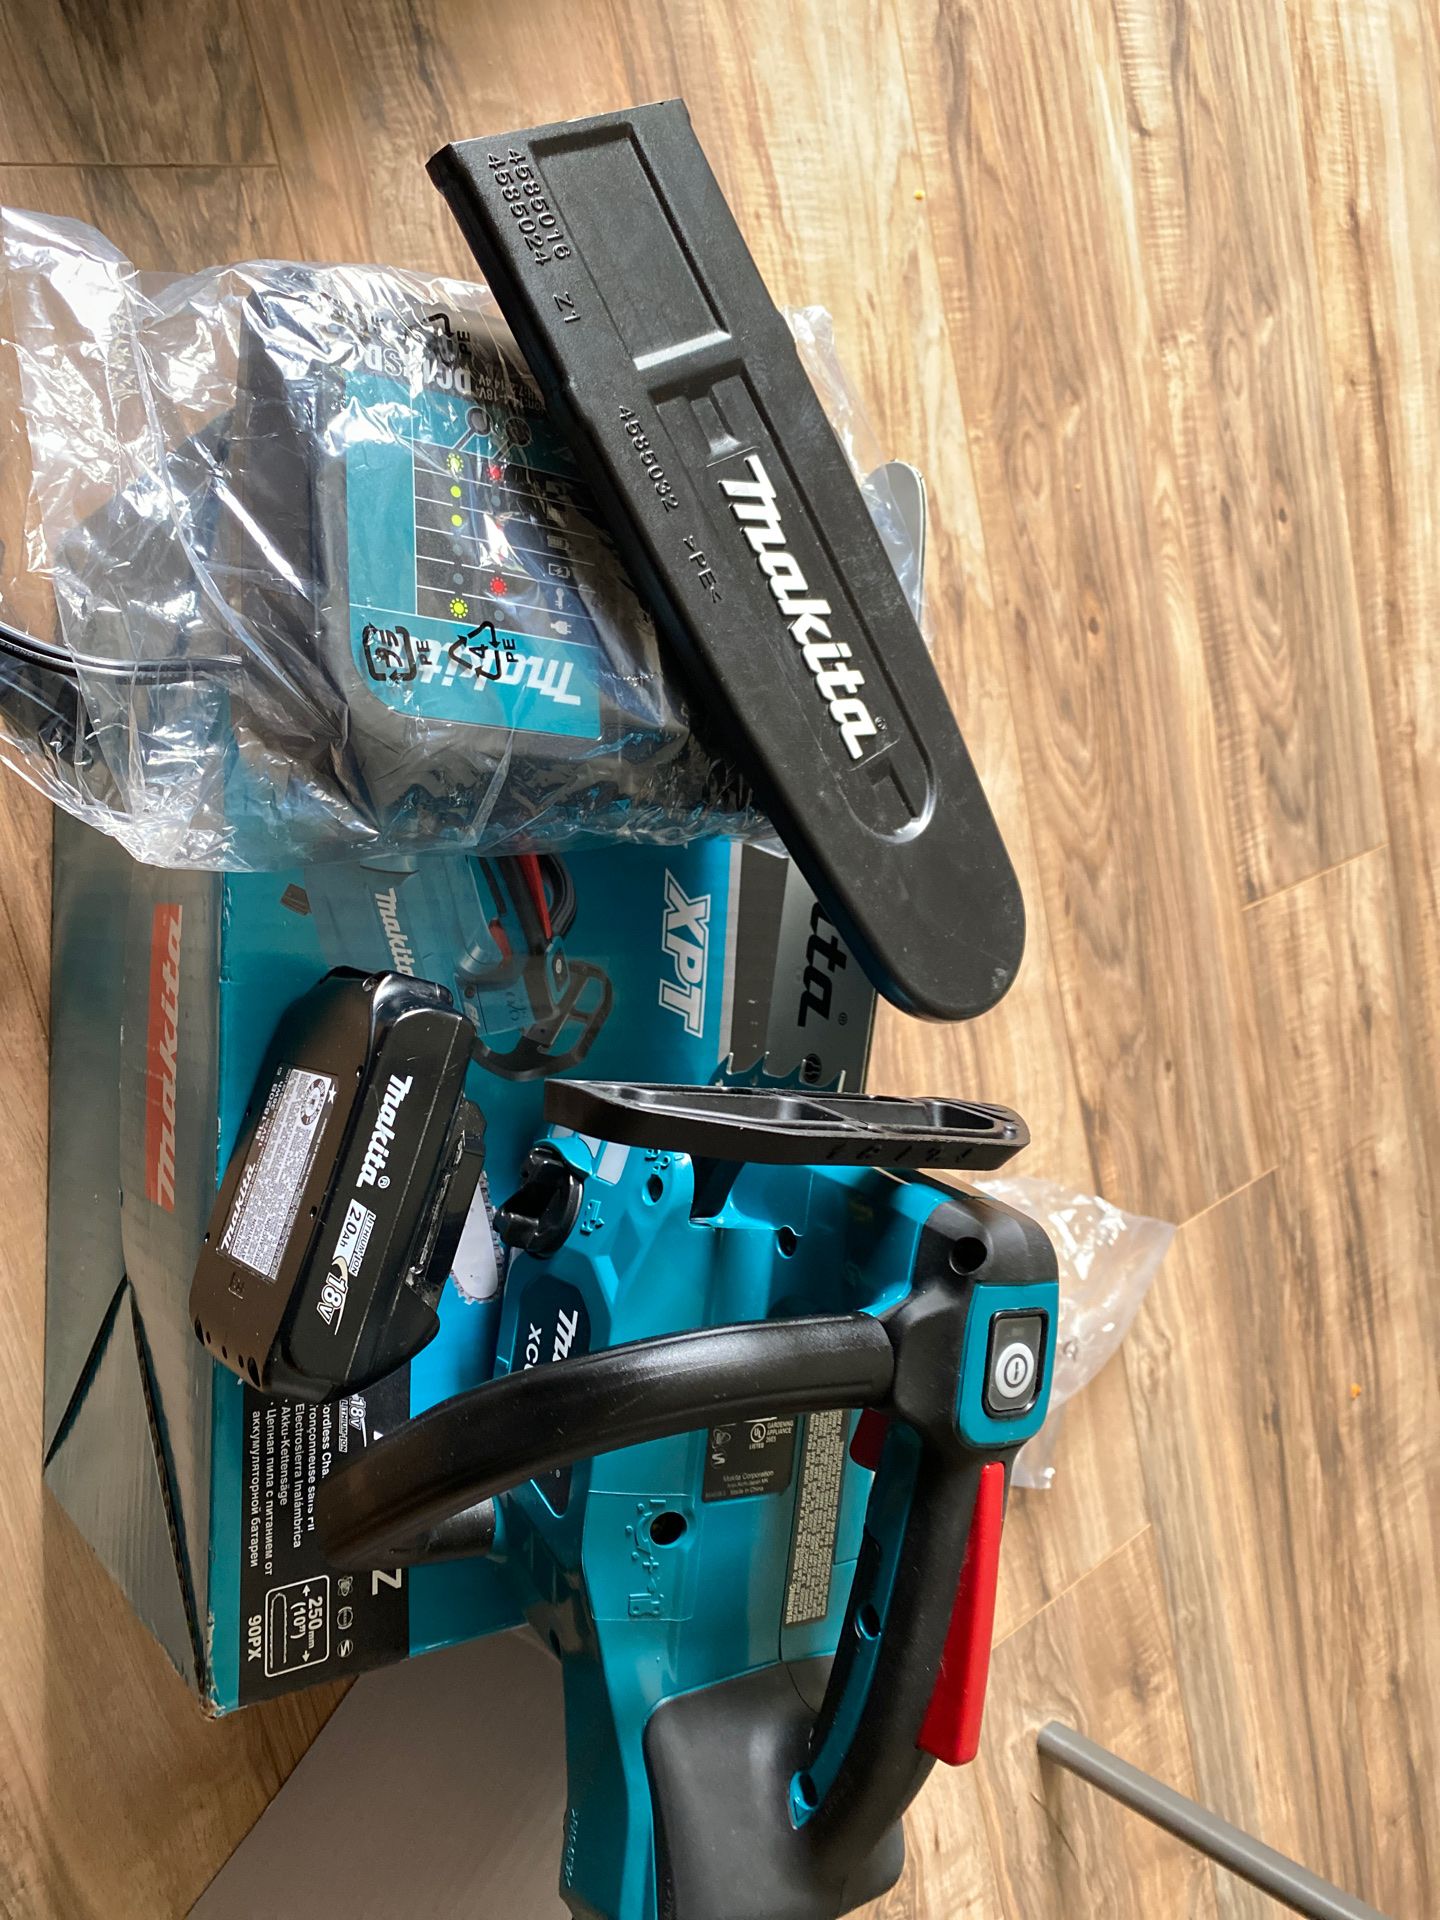 18 volt makita chainsaw. Chain is missing. 230 obo